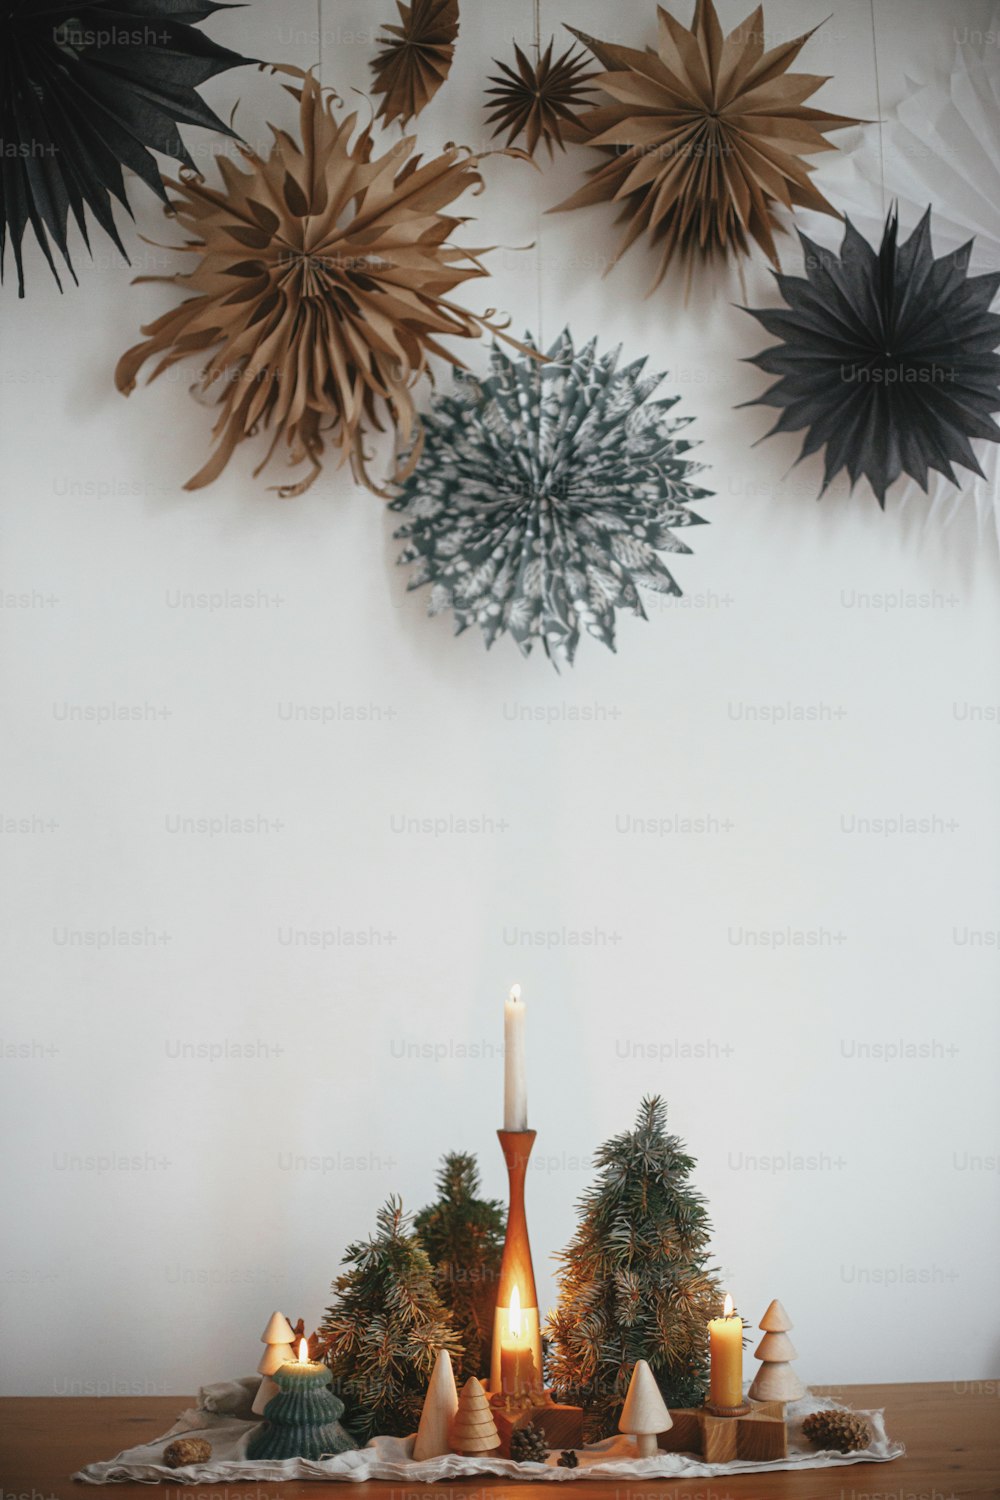 Stylish christmas candles and trees decorations on wooden table on background of white wall with big paper stars. Handmade holiday decor. Atmospheric winter time. Merry Christmas!